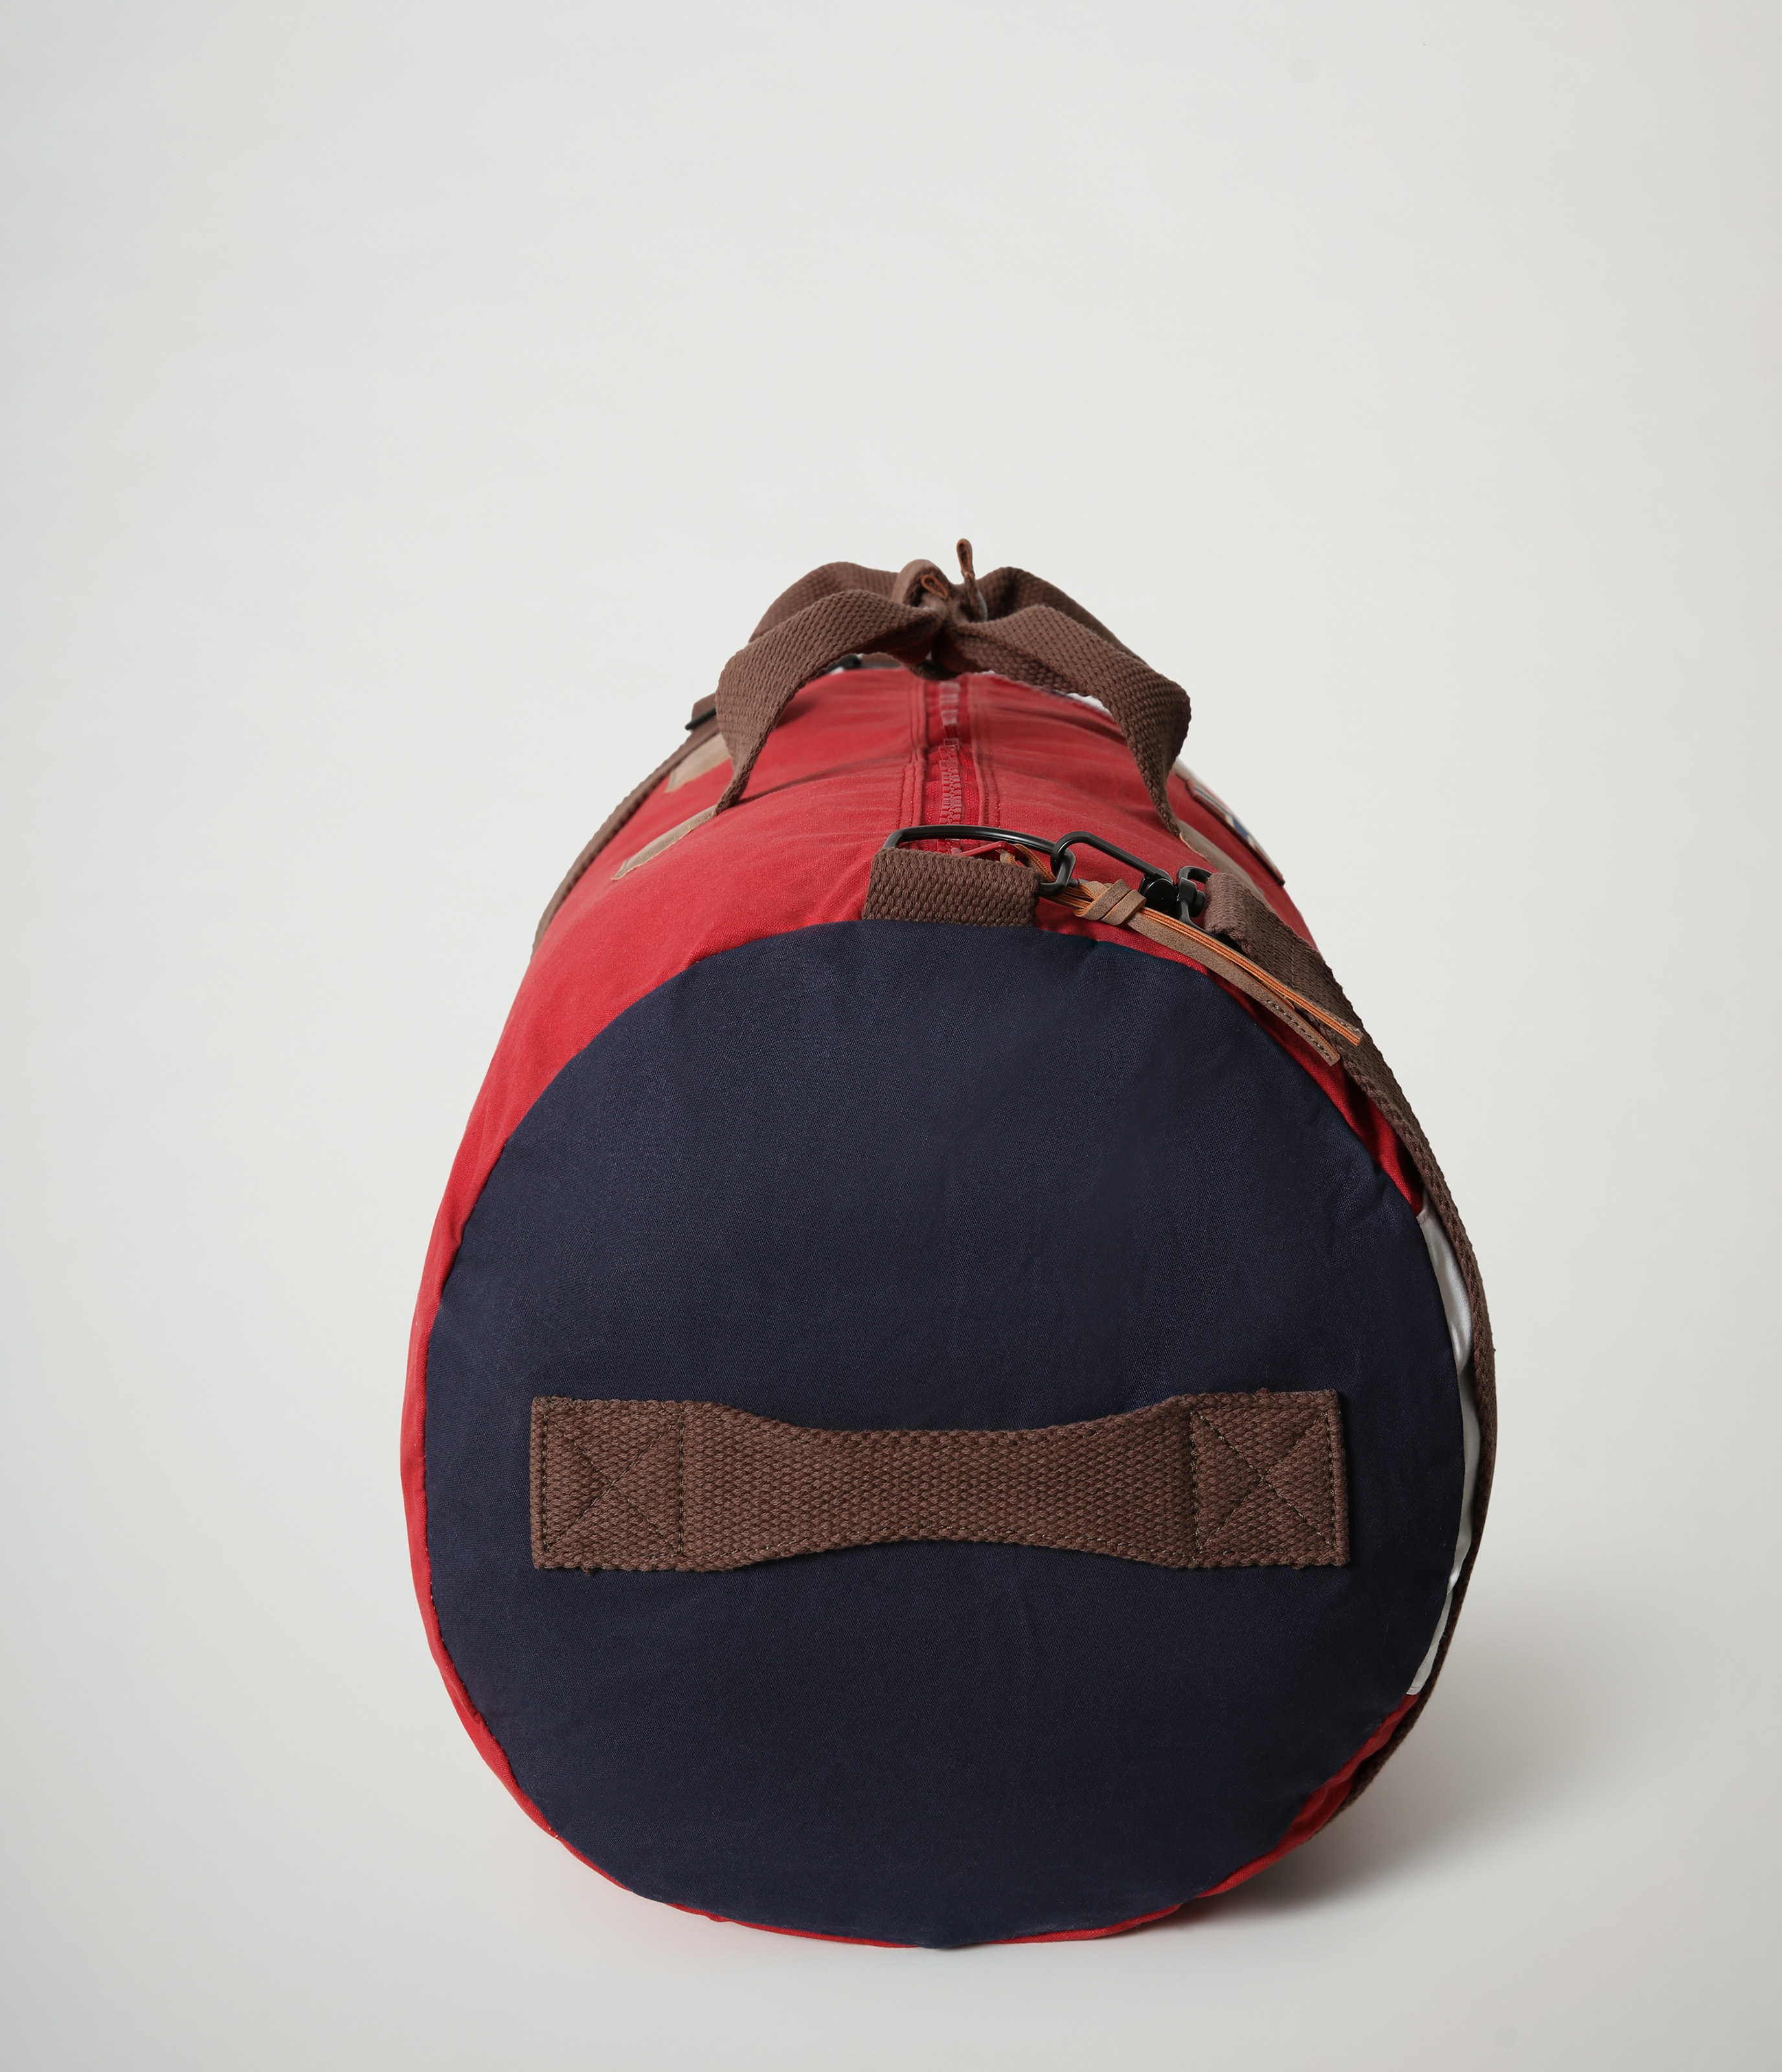 HERING DUFFLE 2 OLD RED 094 